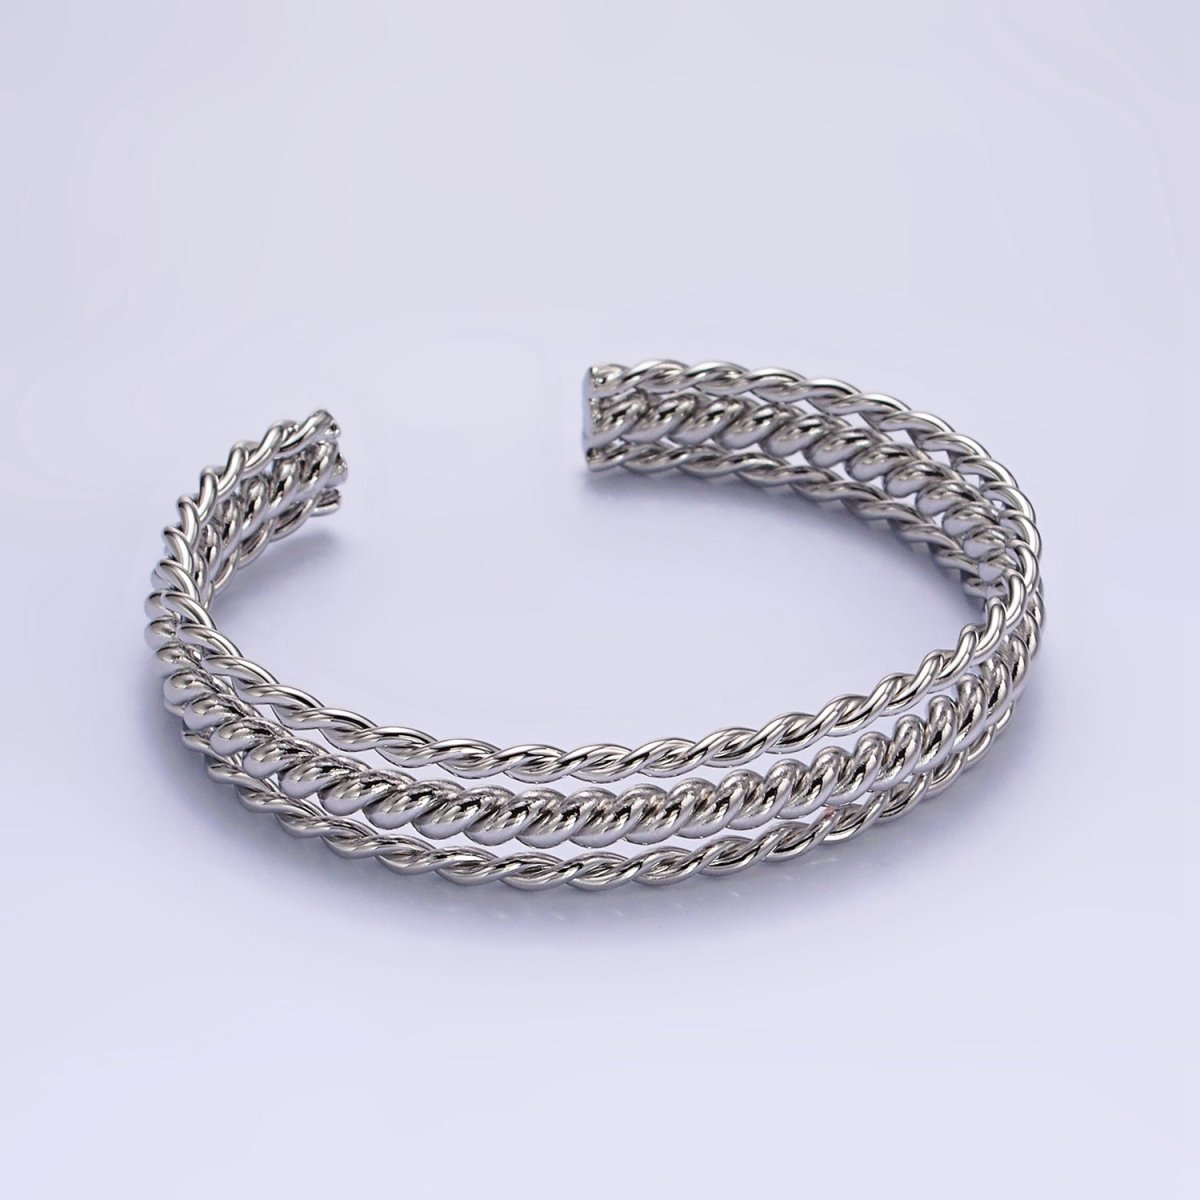 16K Gold Filled Triple Twisted Rope Cuff Bangle Bracelet in Gold & Silver | WA-1918 WA-1919 Clearance Pricing - DLUXCA